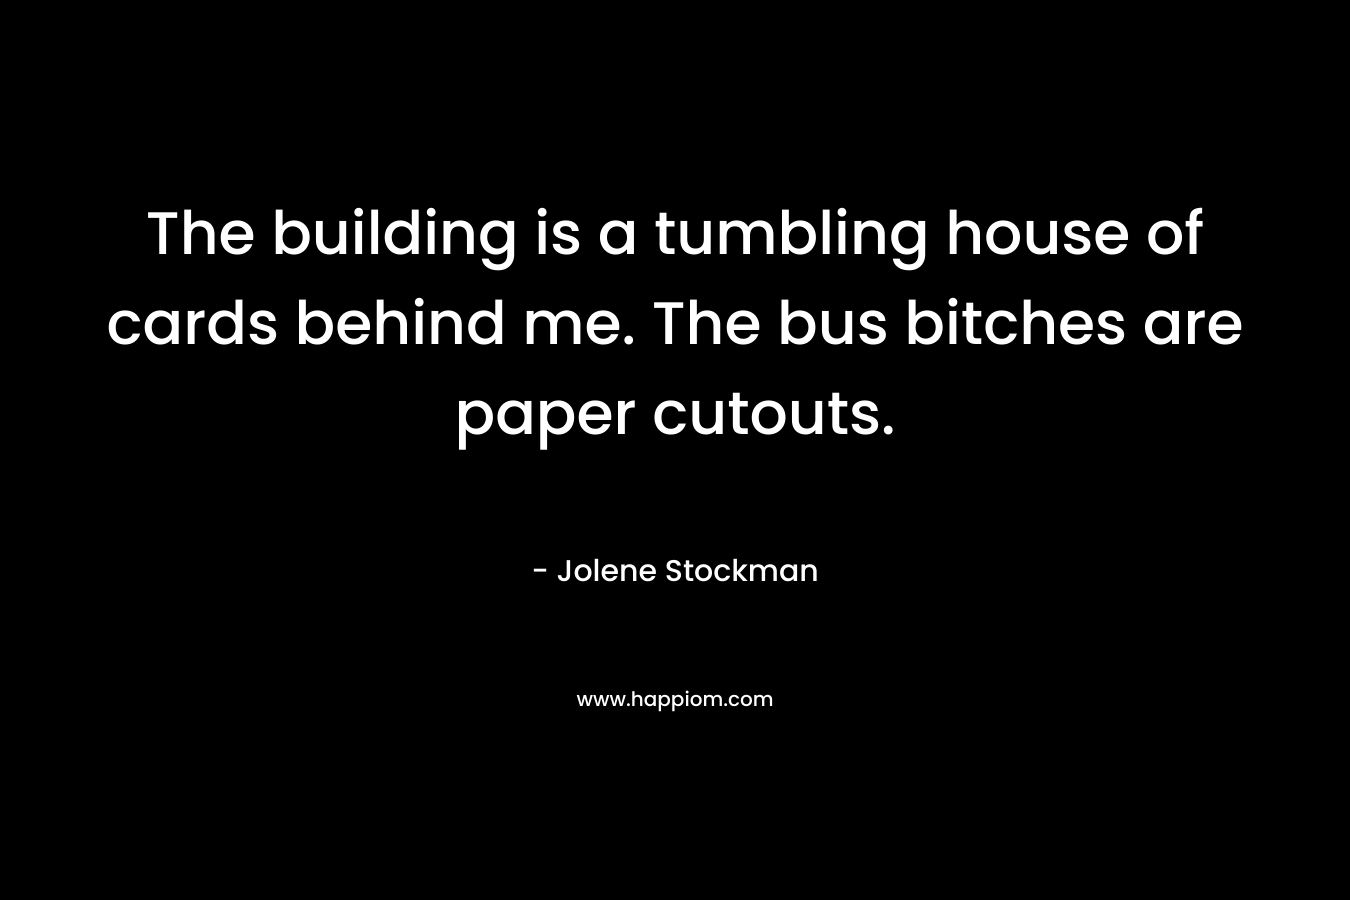 The building is a tumbling house of cards behind me. The bus bitches are paper cutouts. – Jolene Stockman